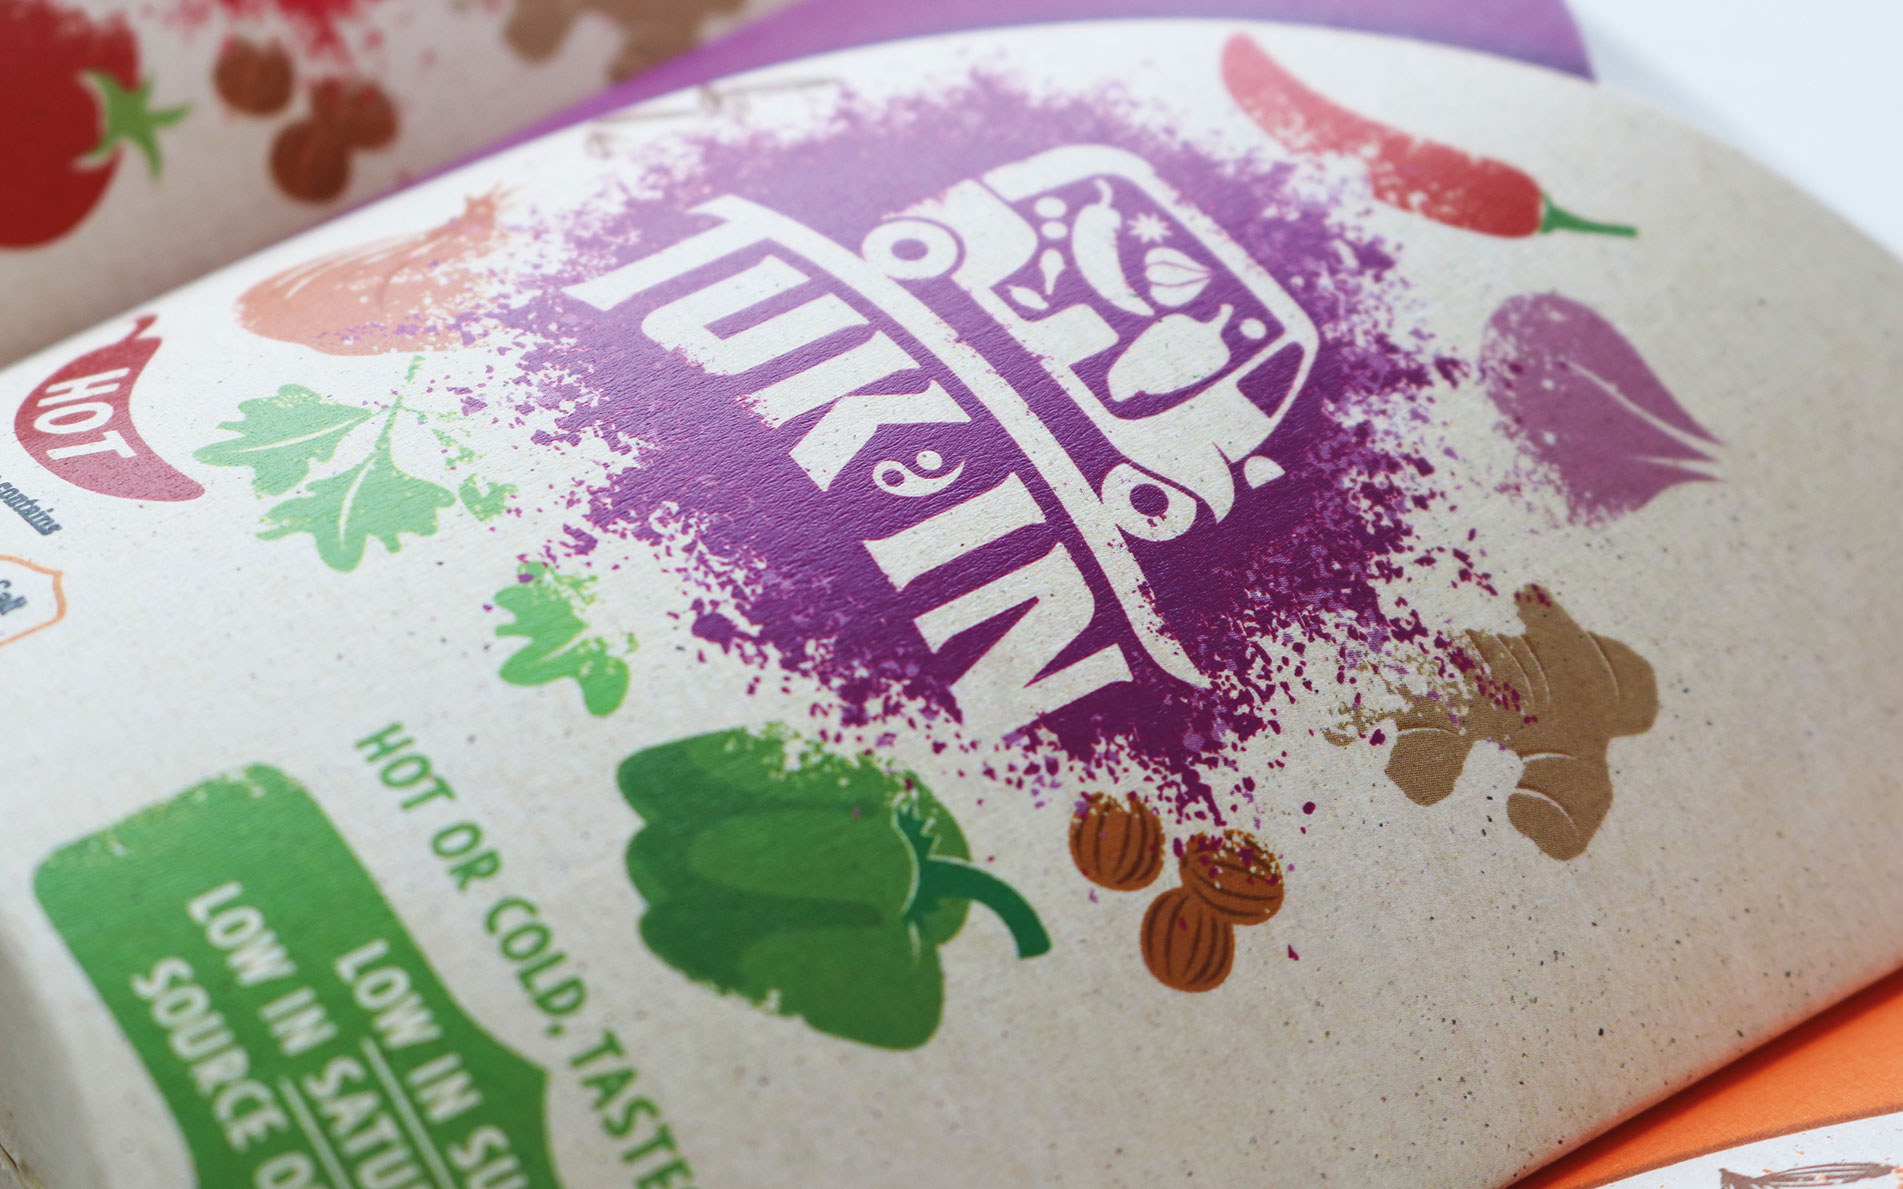 Tuk In curry in a naan packaging close up - Rylands Brand Design